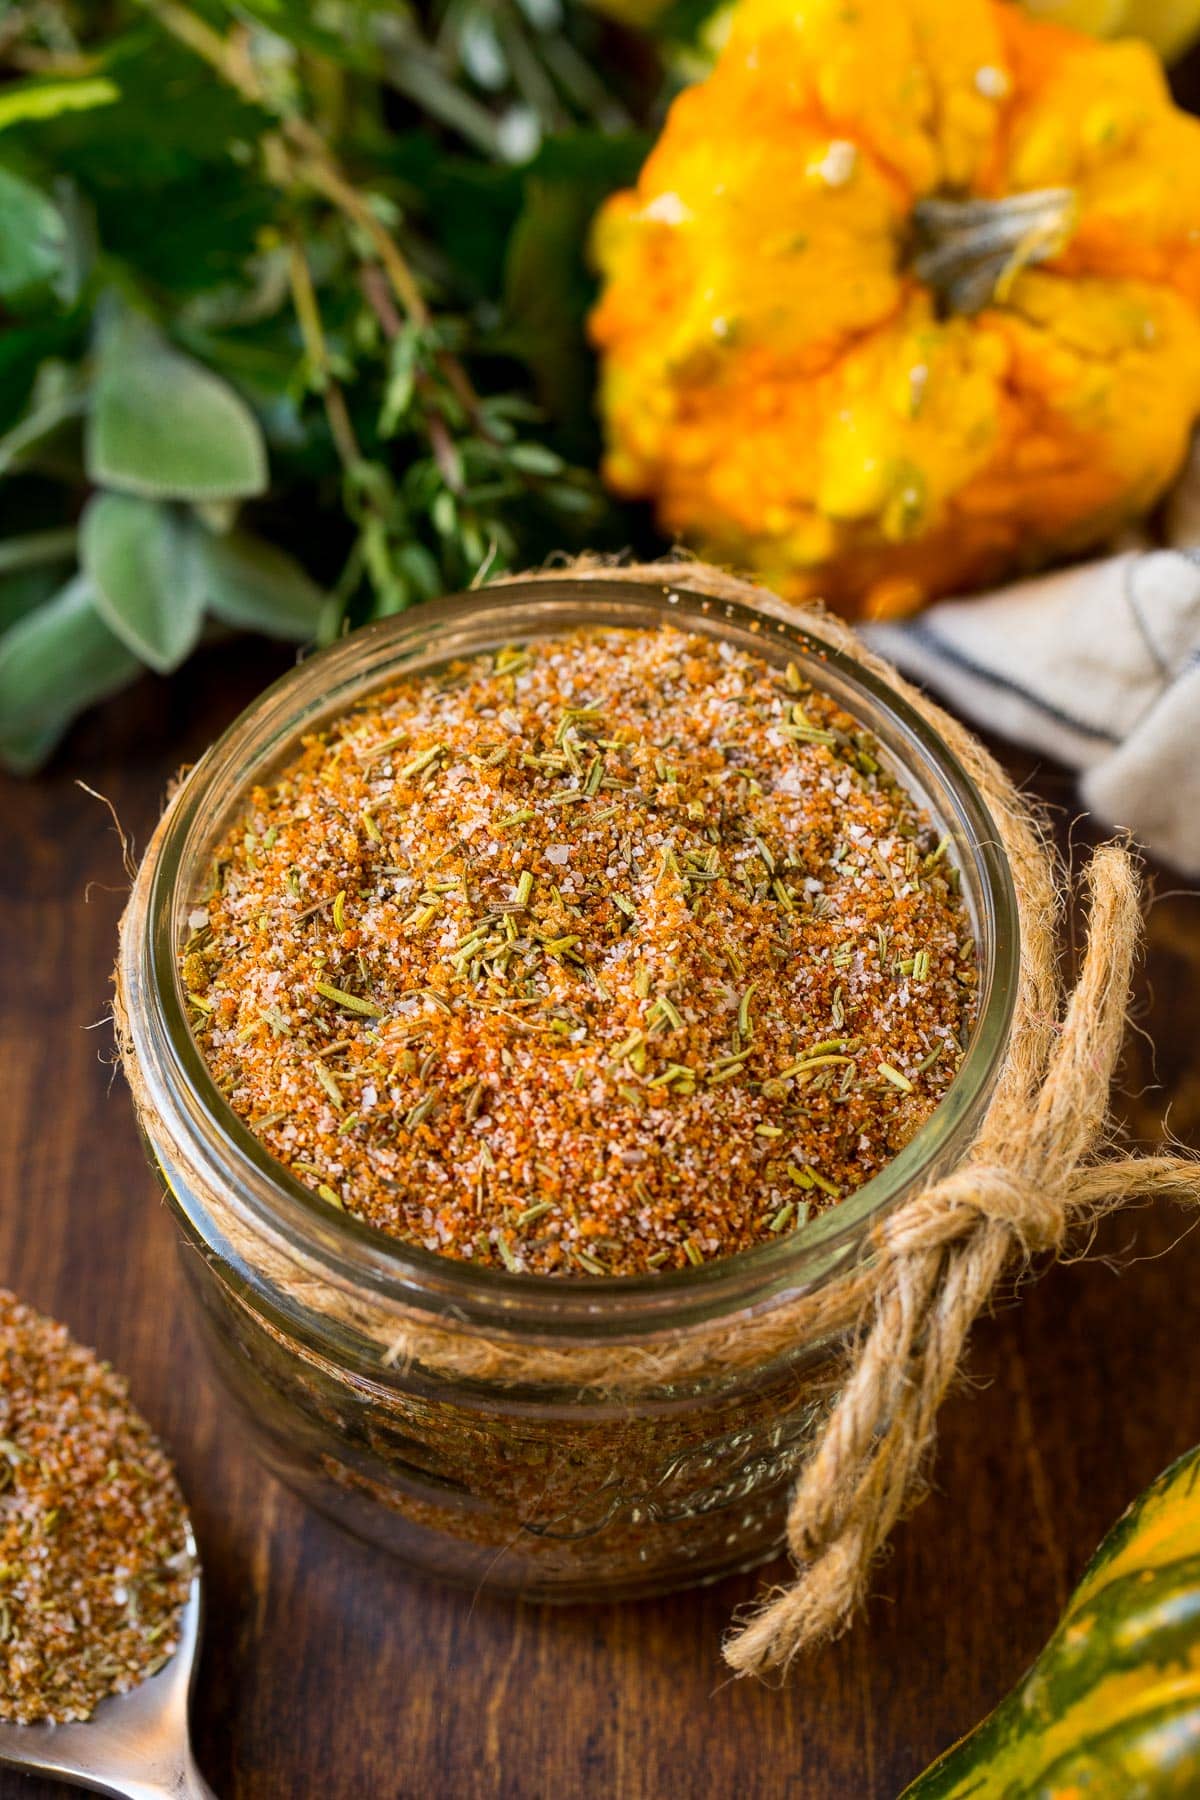 A jar of turkey rub surrounded by squash and herbs.